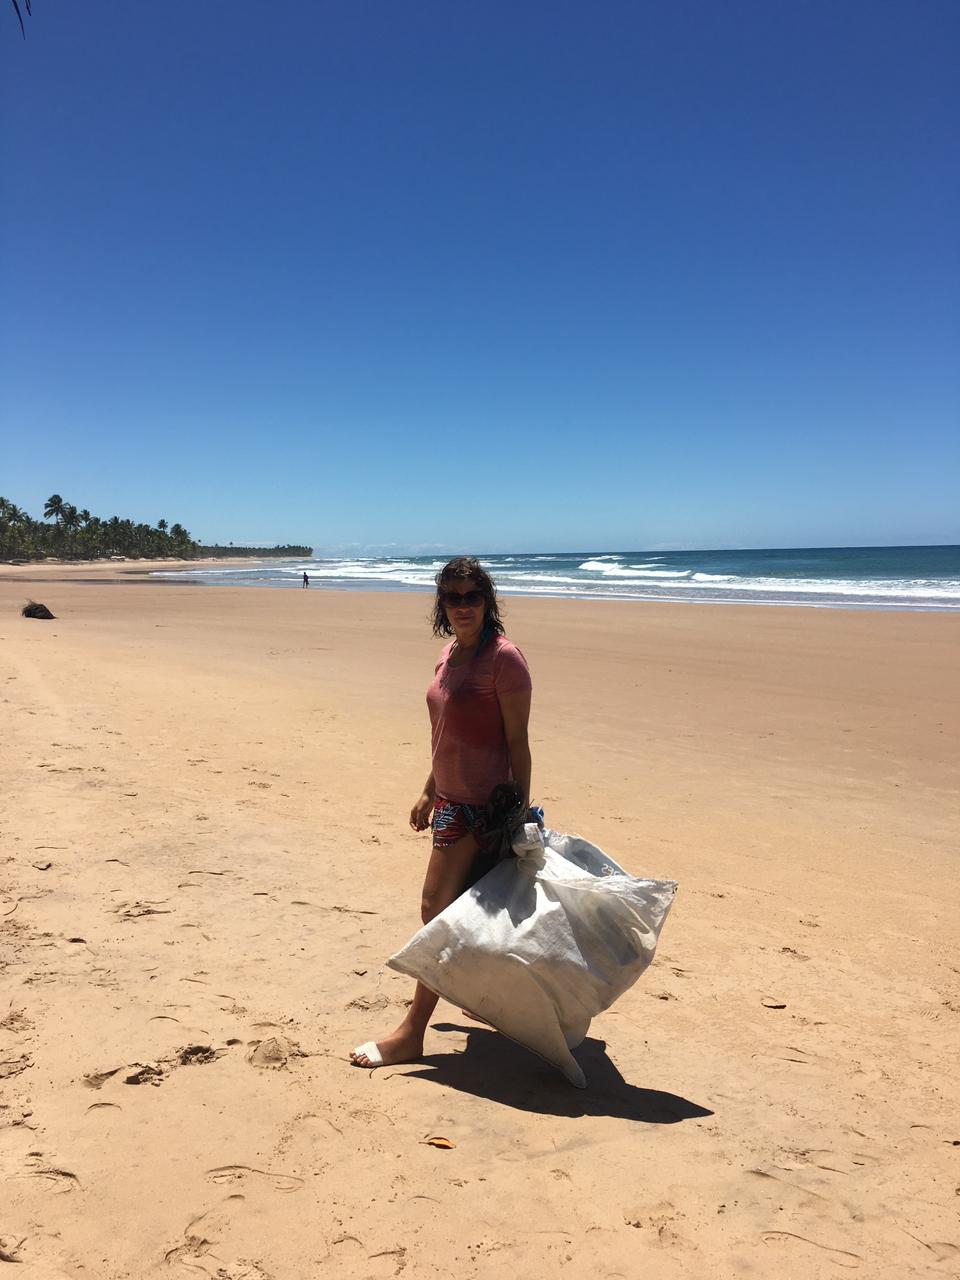 Volunteer collecting crude oil in front of beautiful beach